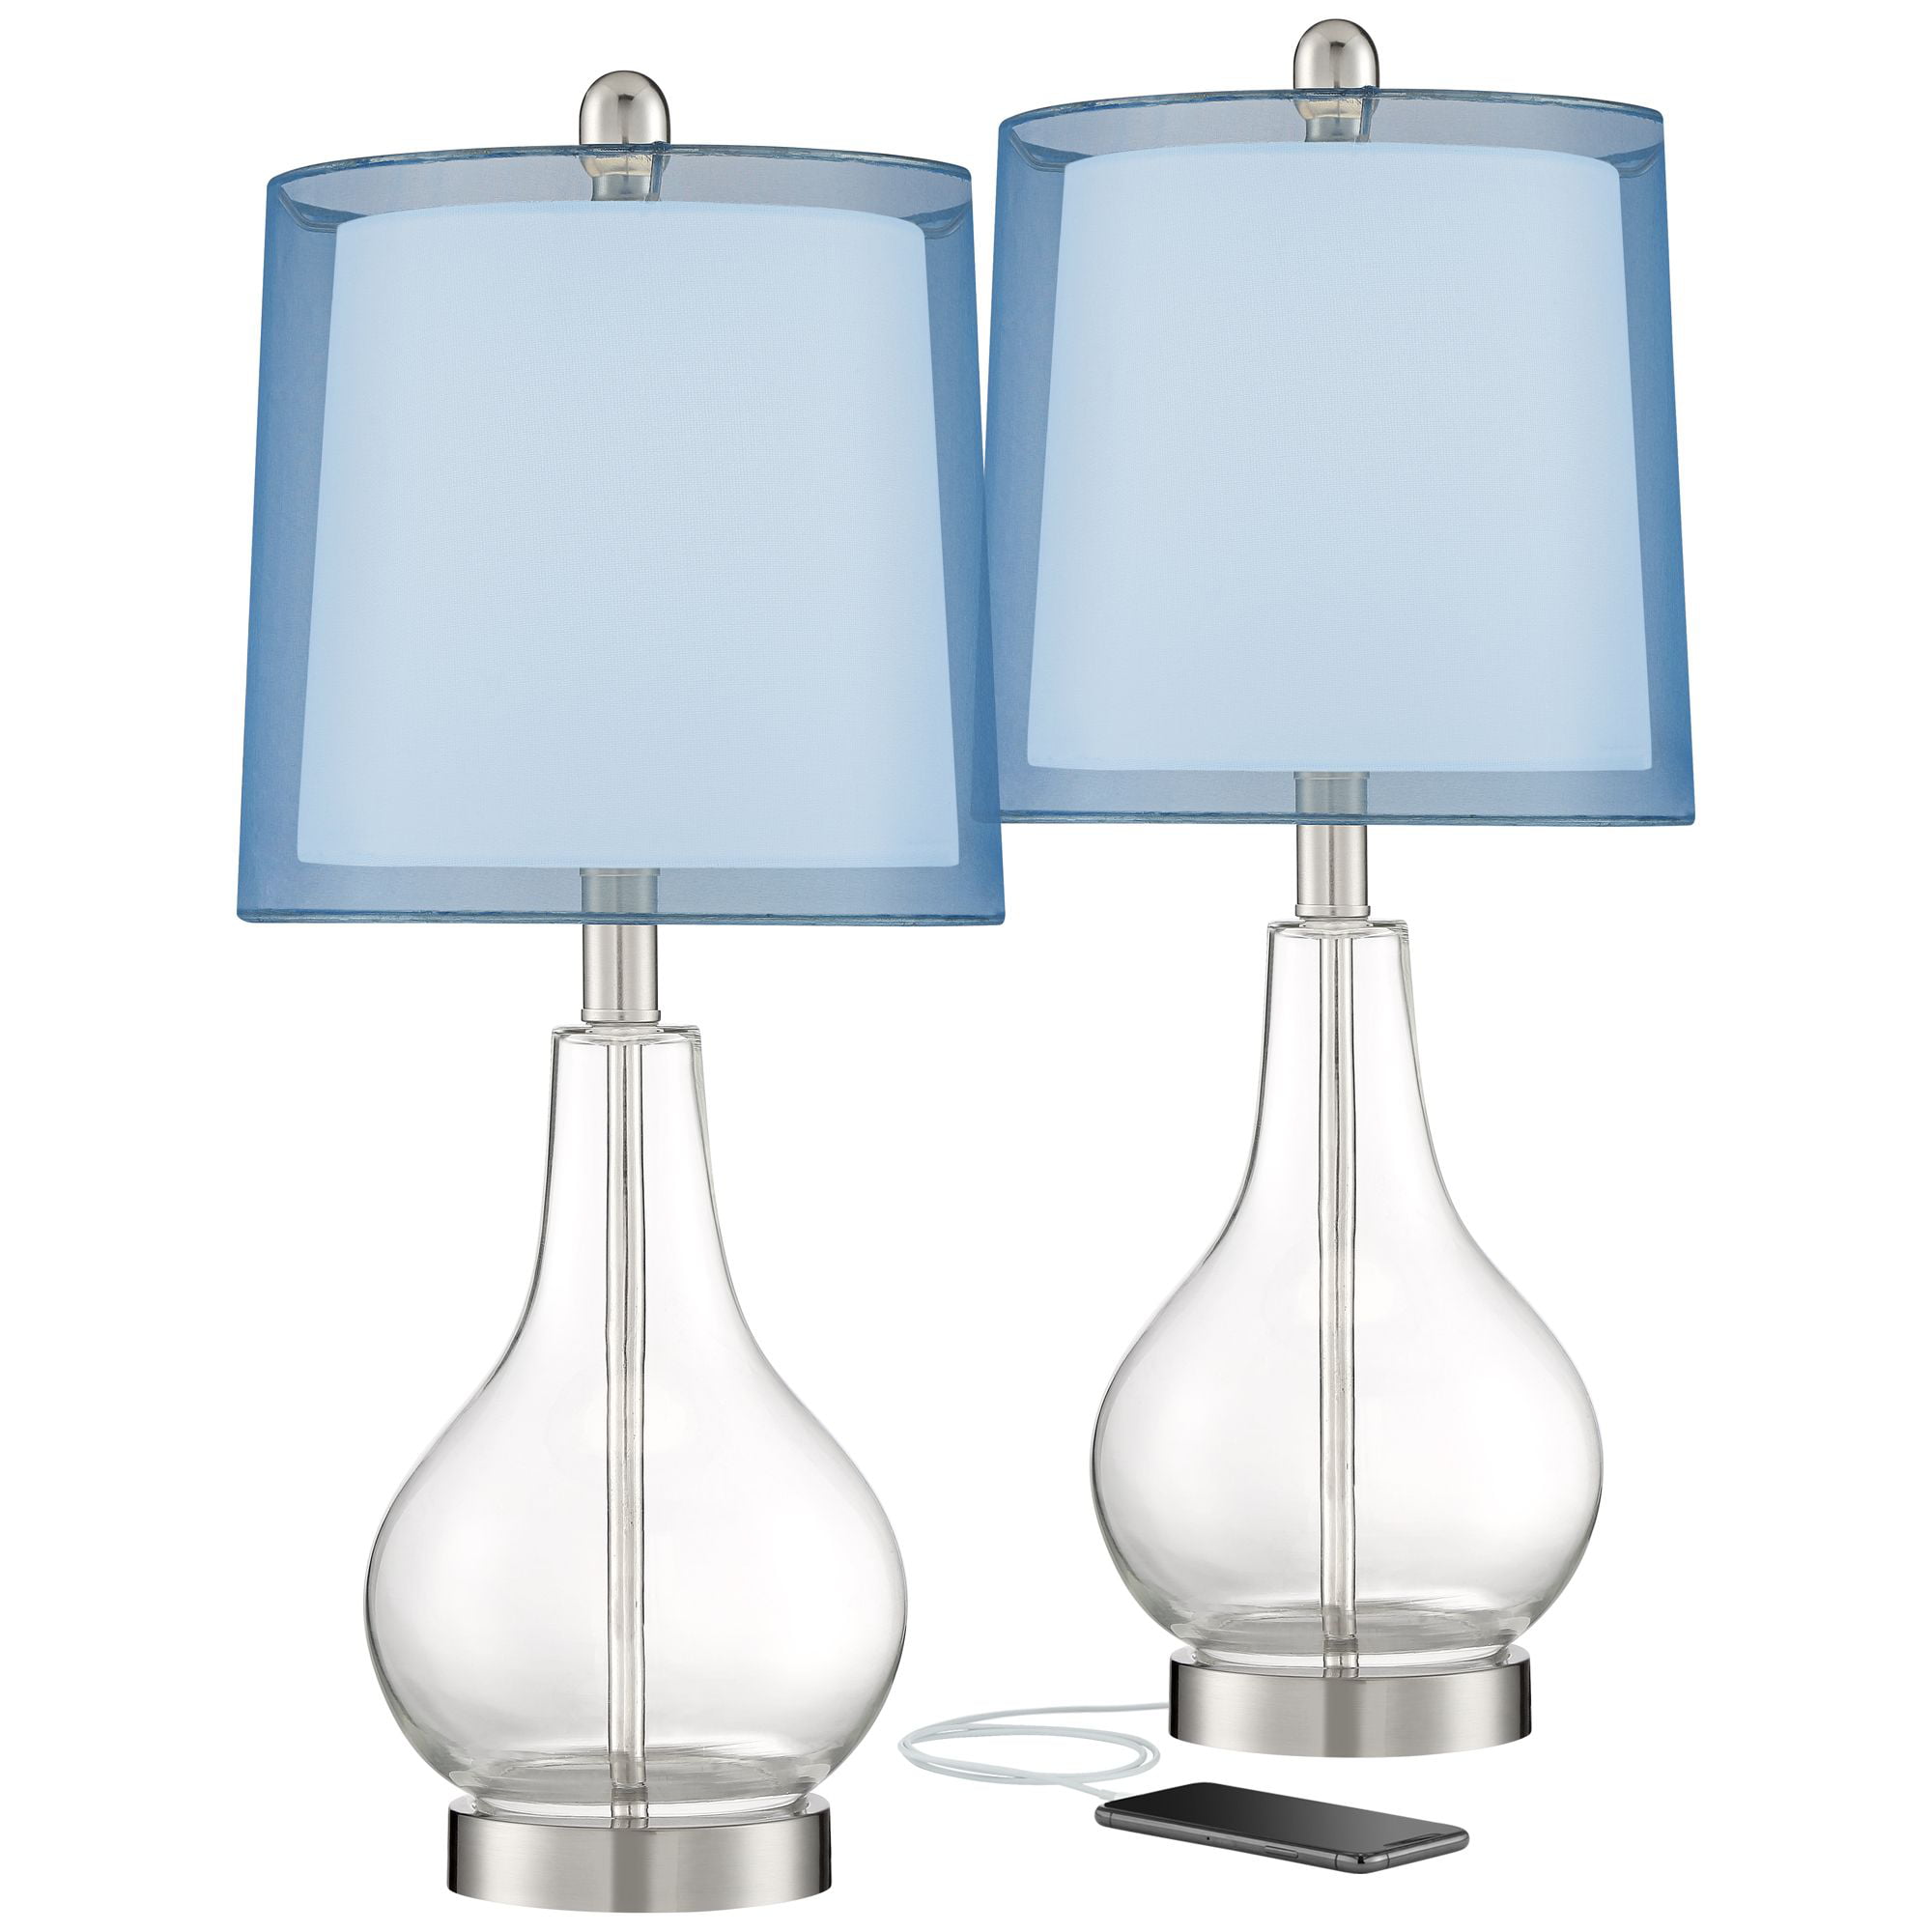 Clear glass lamp shades